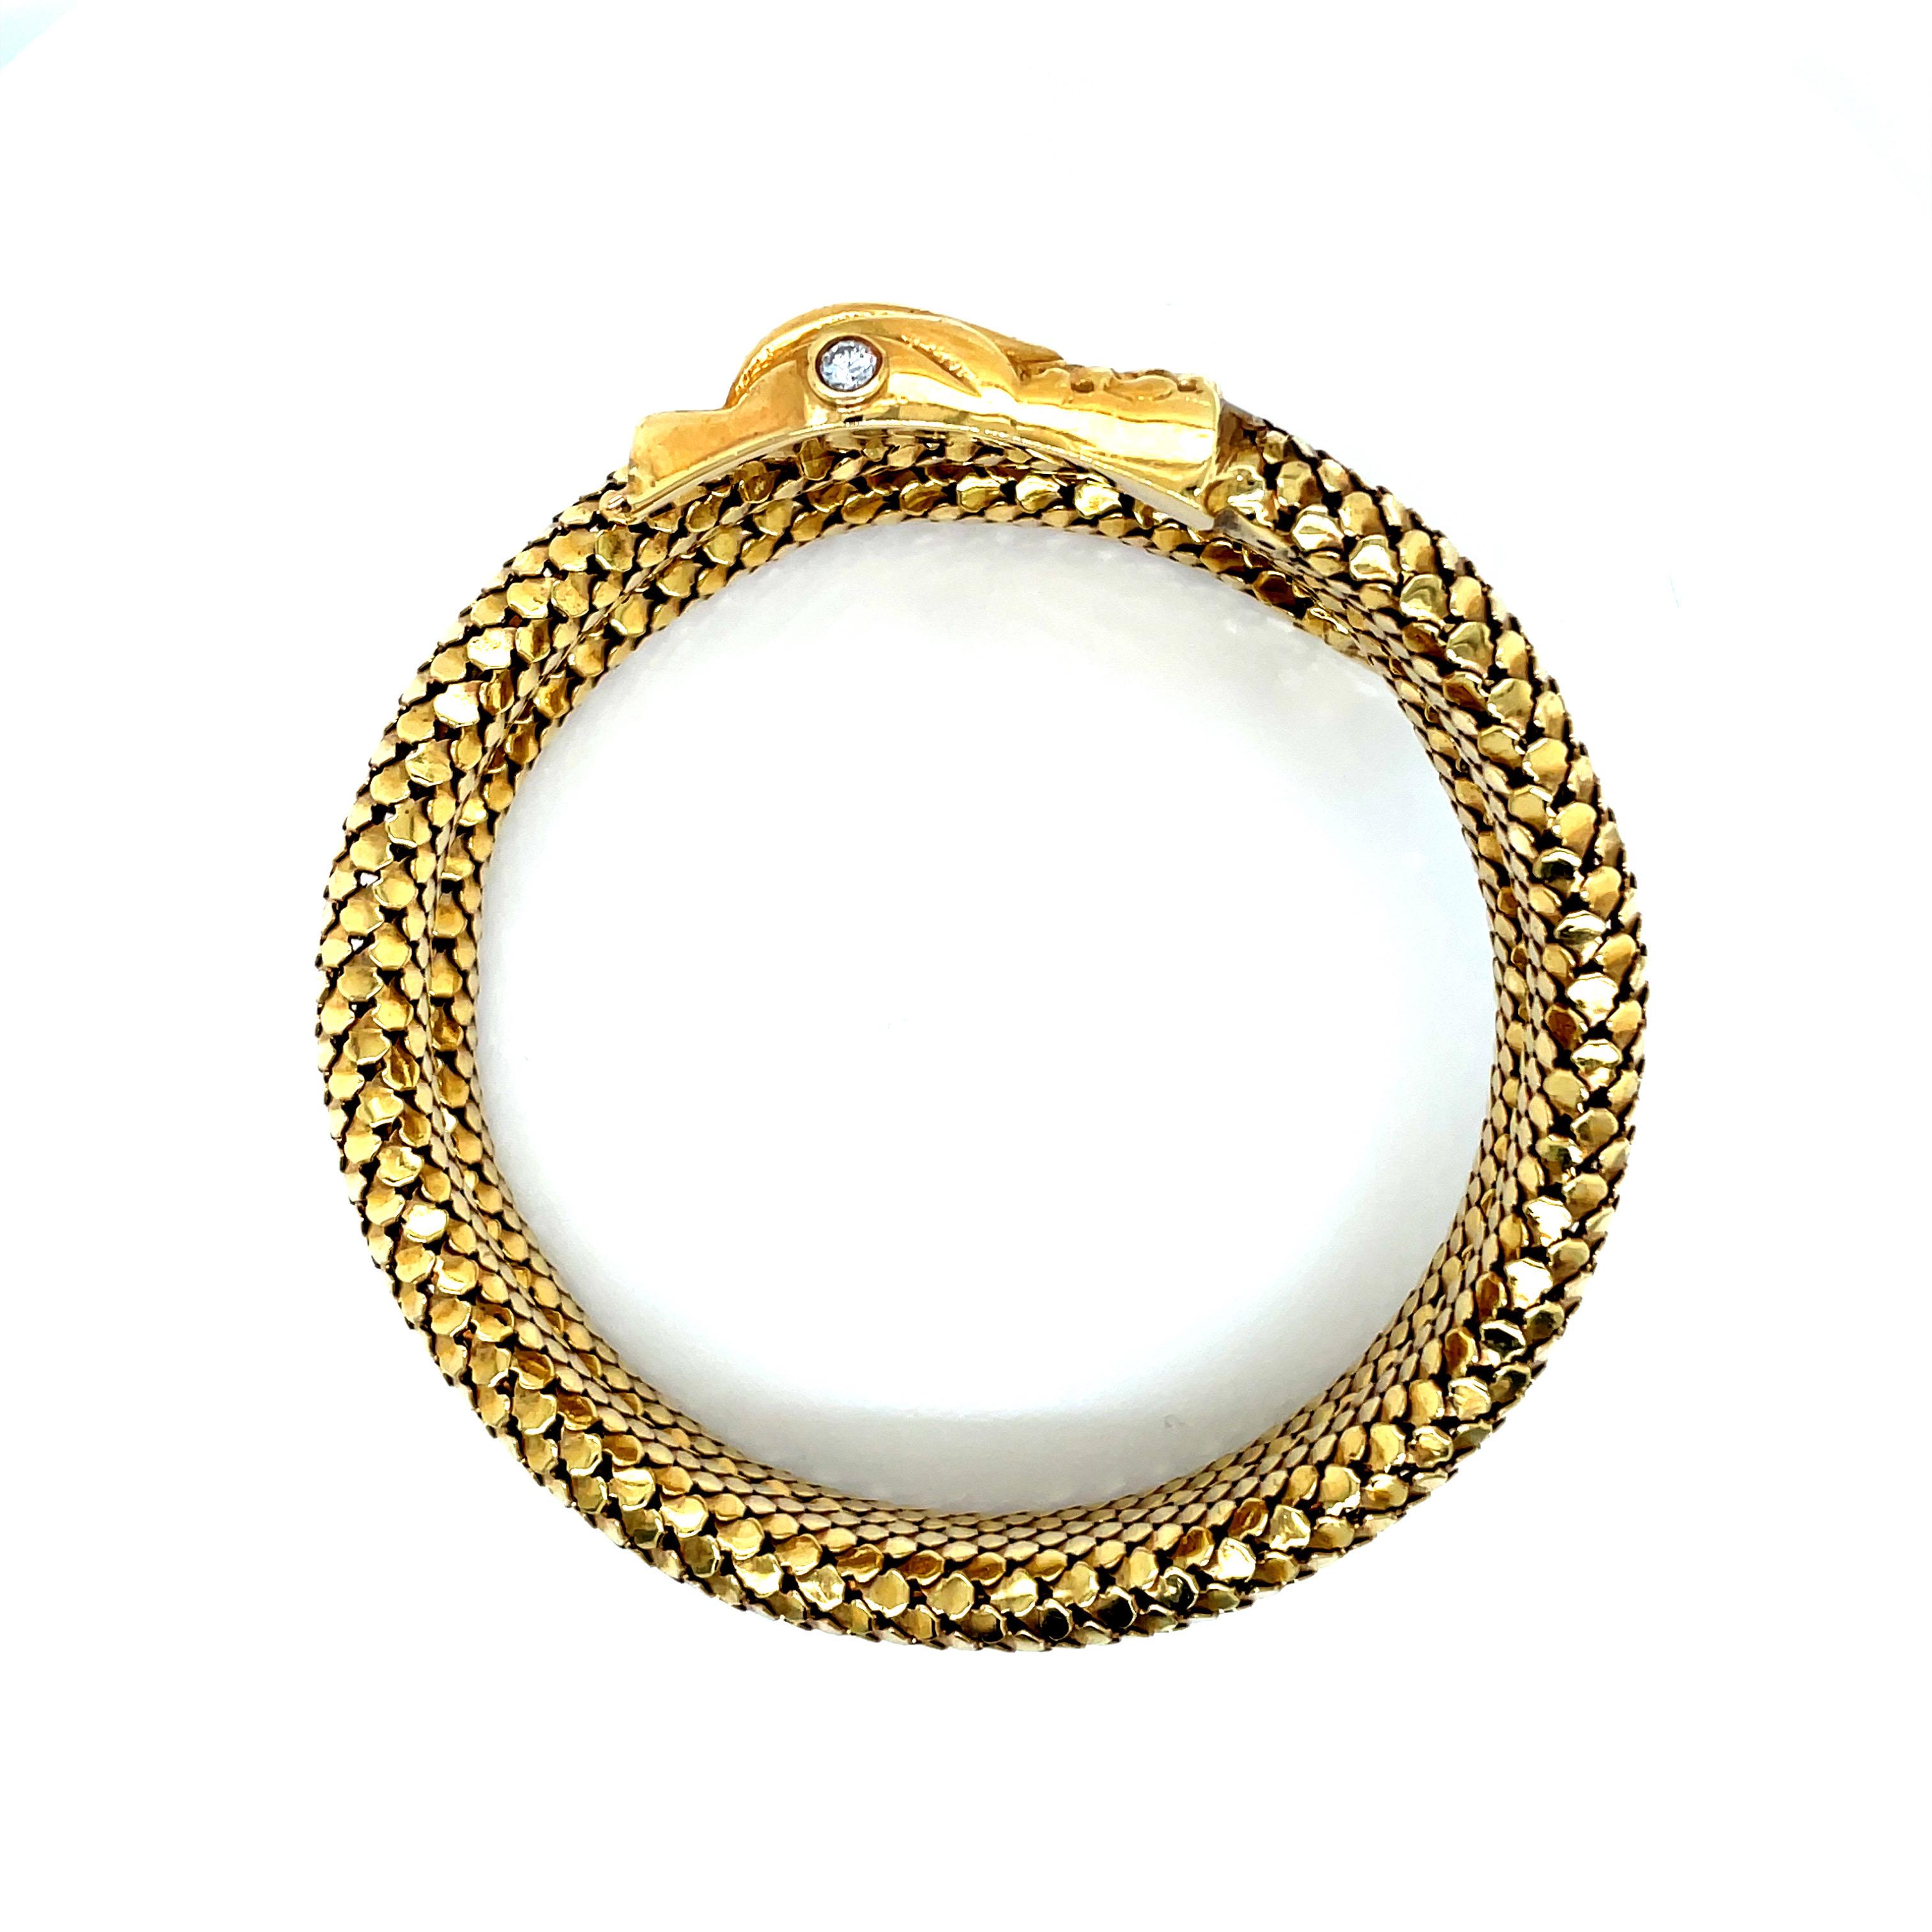 Vintage 1980s 18k Yellow Gold Snake Bracelet and Arm Band For Sale 2